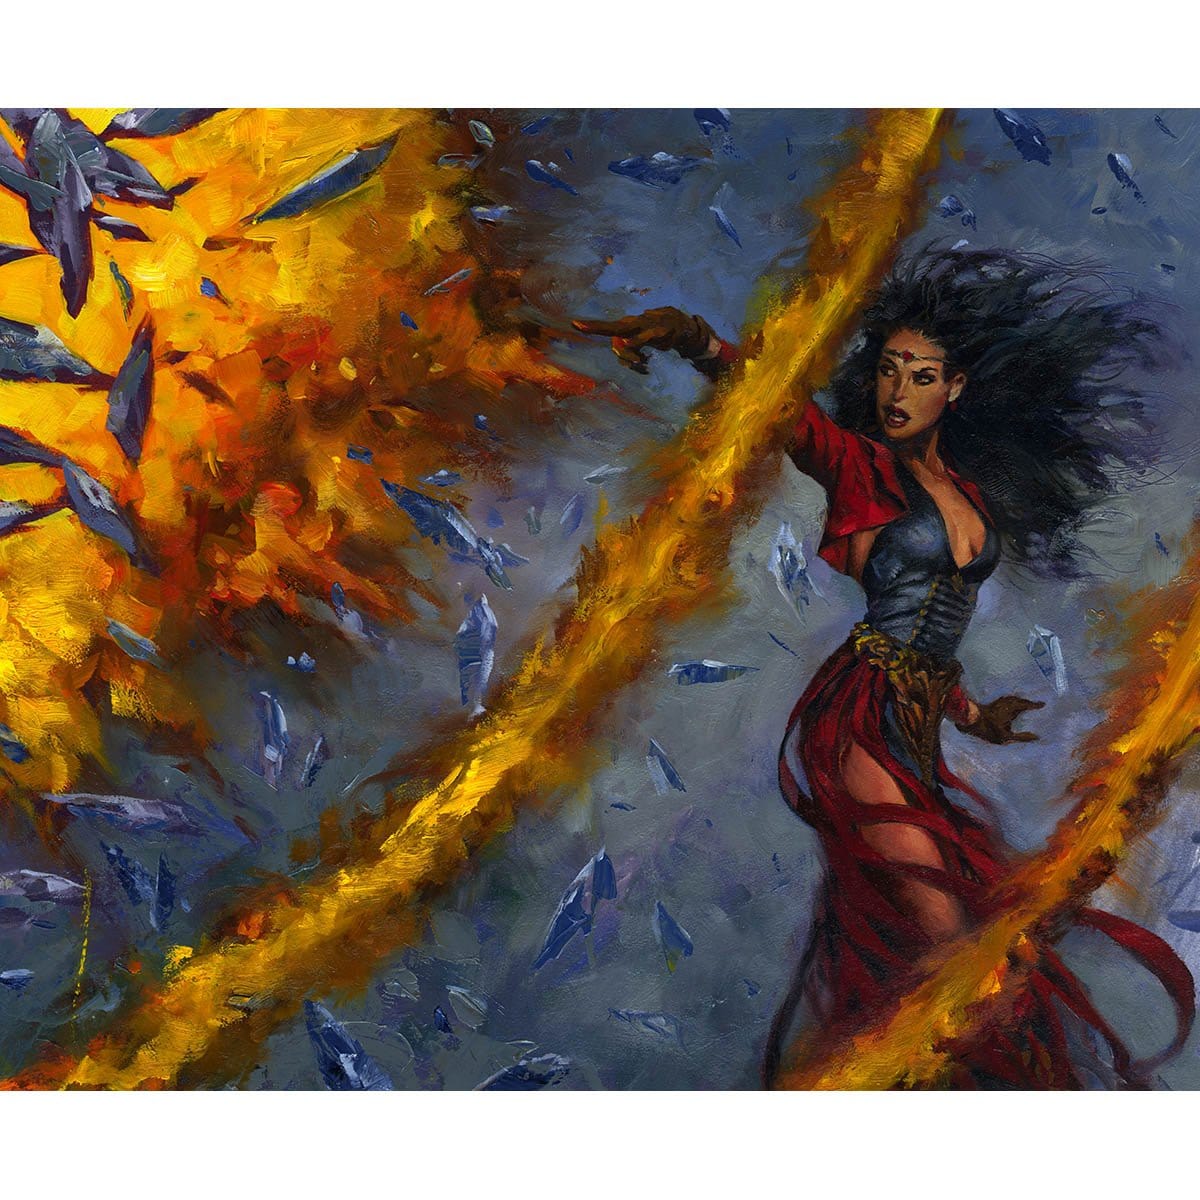 Red Elemental Blast Print - Print - Original Magic Art - Accessories for Magic the Gathering and other card games